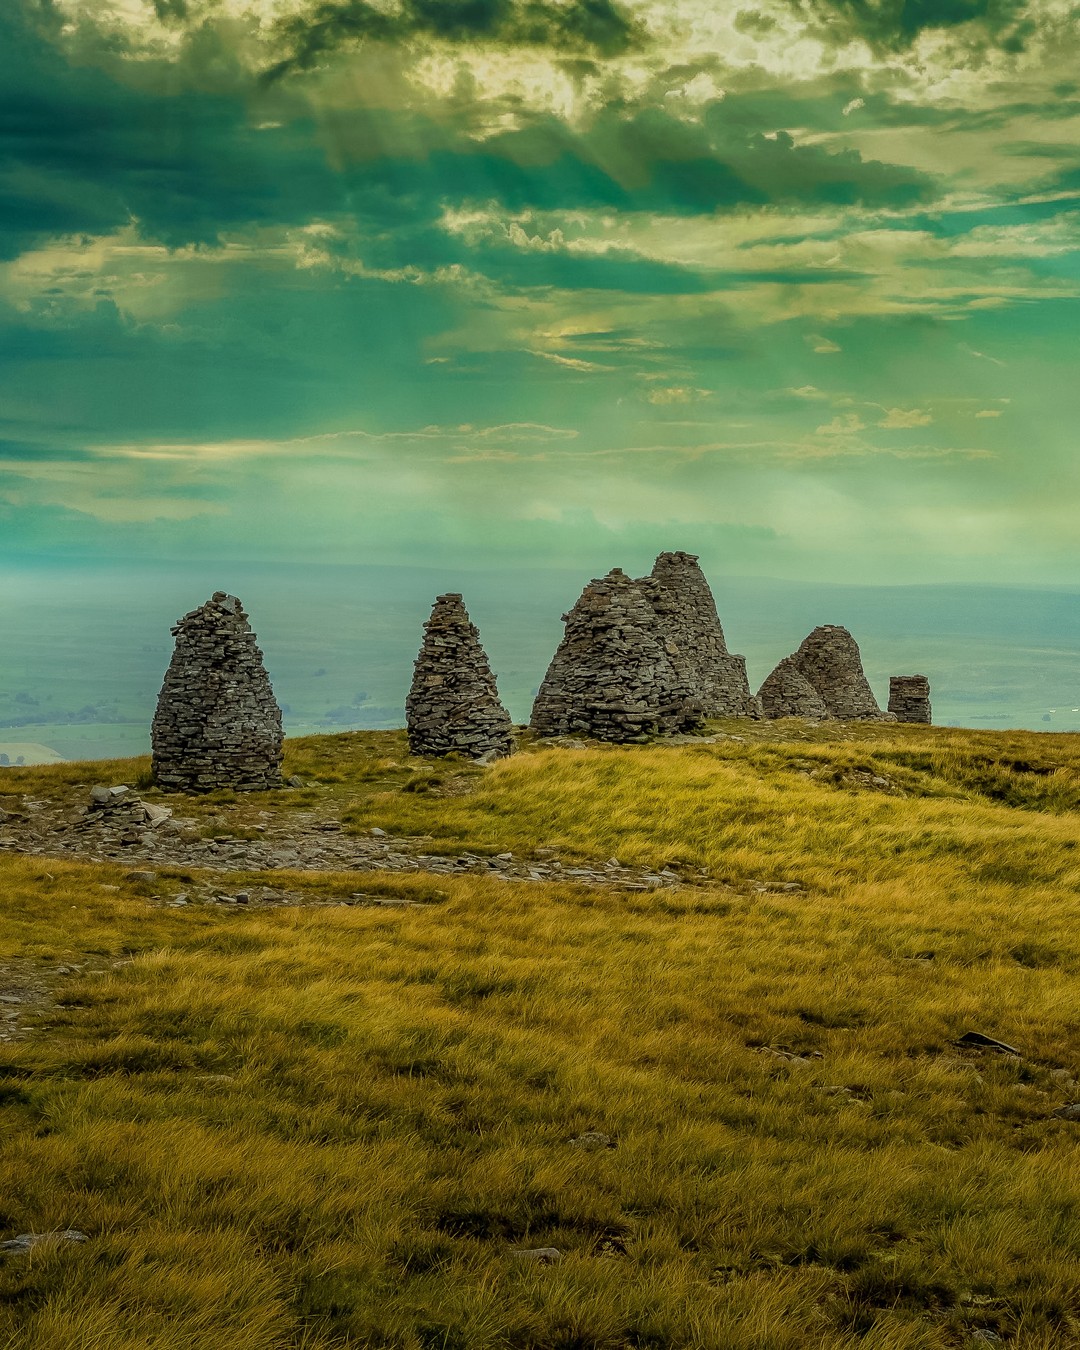 The line of cairns on the iconic Nine Standards Rigg at the summit of Hartley Fell in the @yorkshiredales.

No one knows their purpose, but one theory suggests that the cairns were constructed by the Roman army to resemble troops from a distance.
-
-
-
-
-
-
#YorkshireDales #uknationalparks #visityorkshire #Welcometoyorkshire #omgb #scenesofyorkshire #yorkshirepost #EscapeTheEveryday #LoveGreatBritain #GetOutside #ordnancesurvey #TGO #TheGreatOutdoors #lonelyplanet #hikebritain #walkinguk #alltrails #OutdoorsIndoors